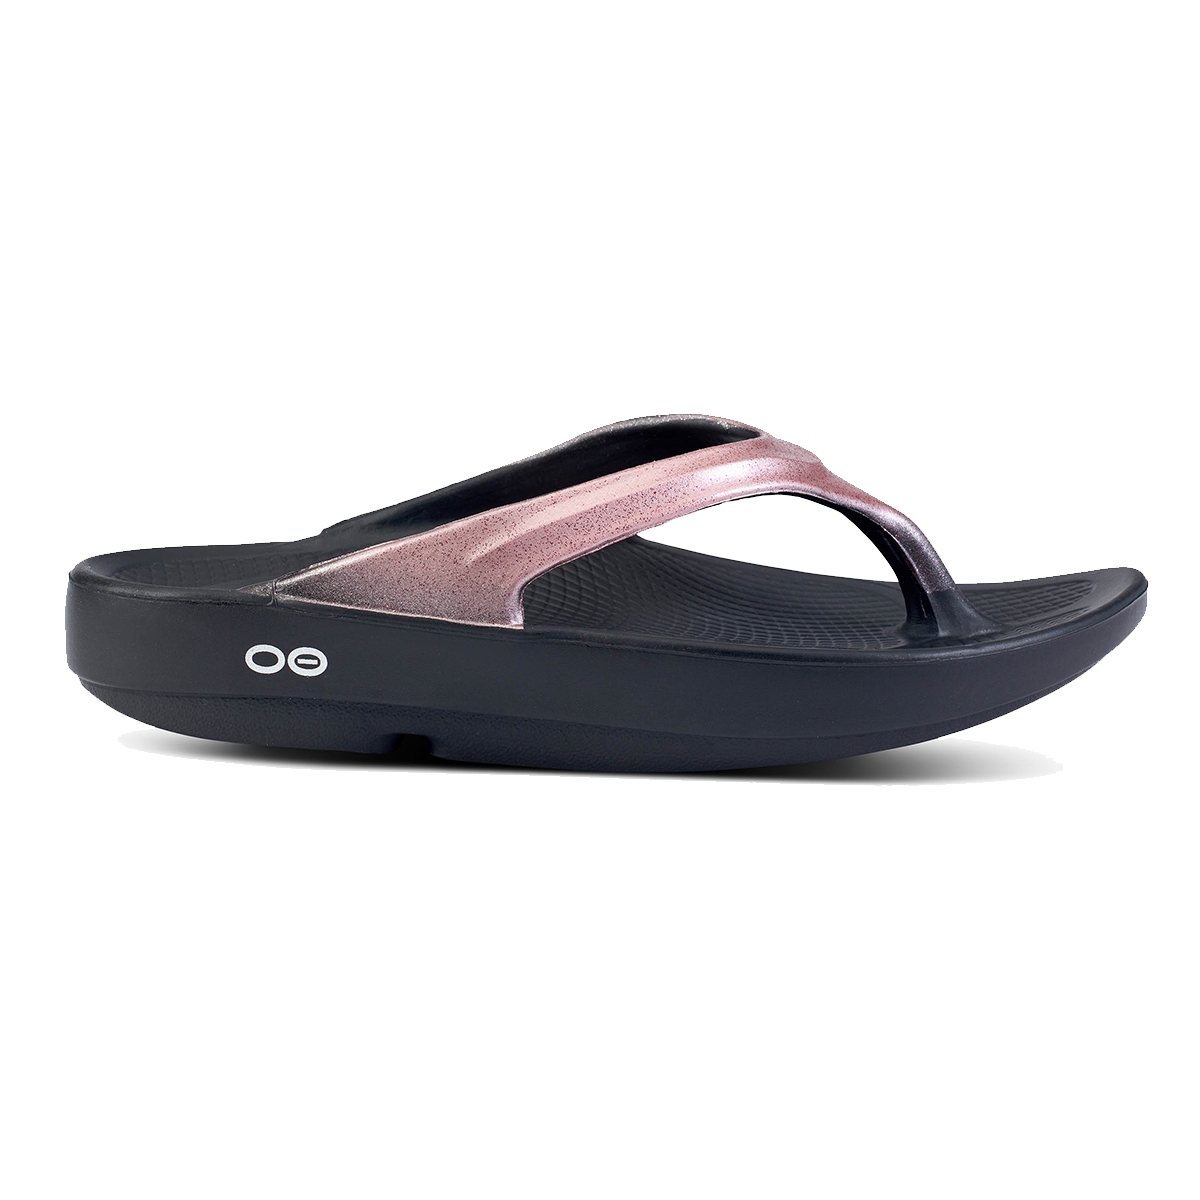 OOFOS WOMENS OOLALA LUXE SANDAL - BLACK/ROSE SPARKLE - CLEARANCE 